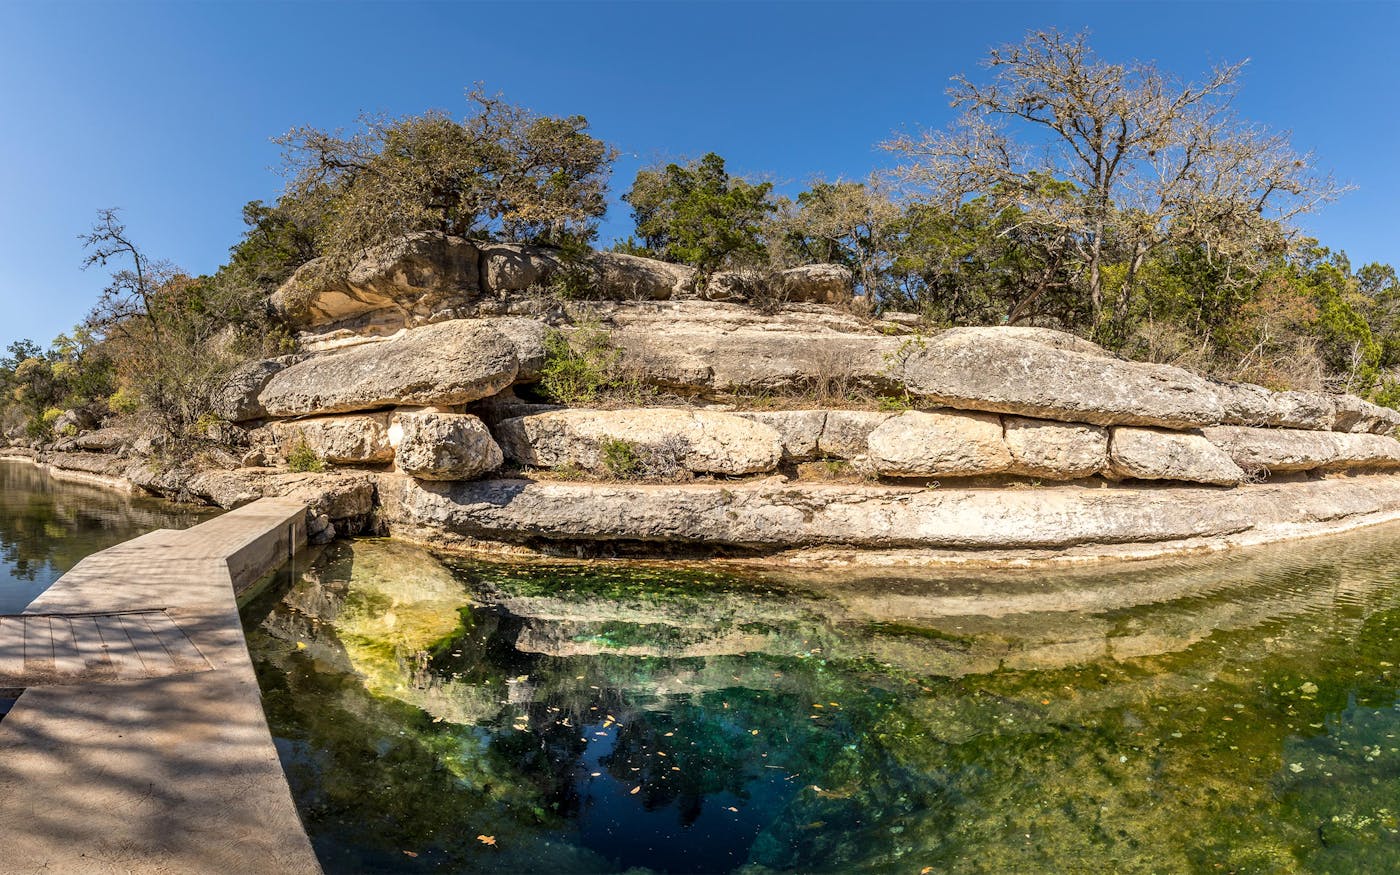 Wimberley closes Blue Hole for two weeks due to low water levels